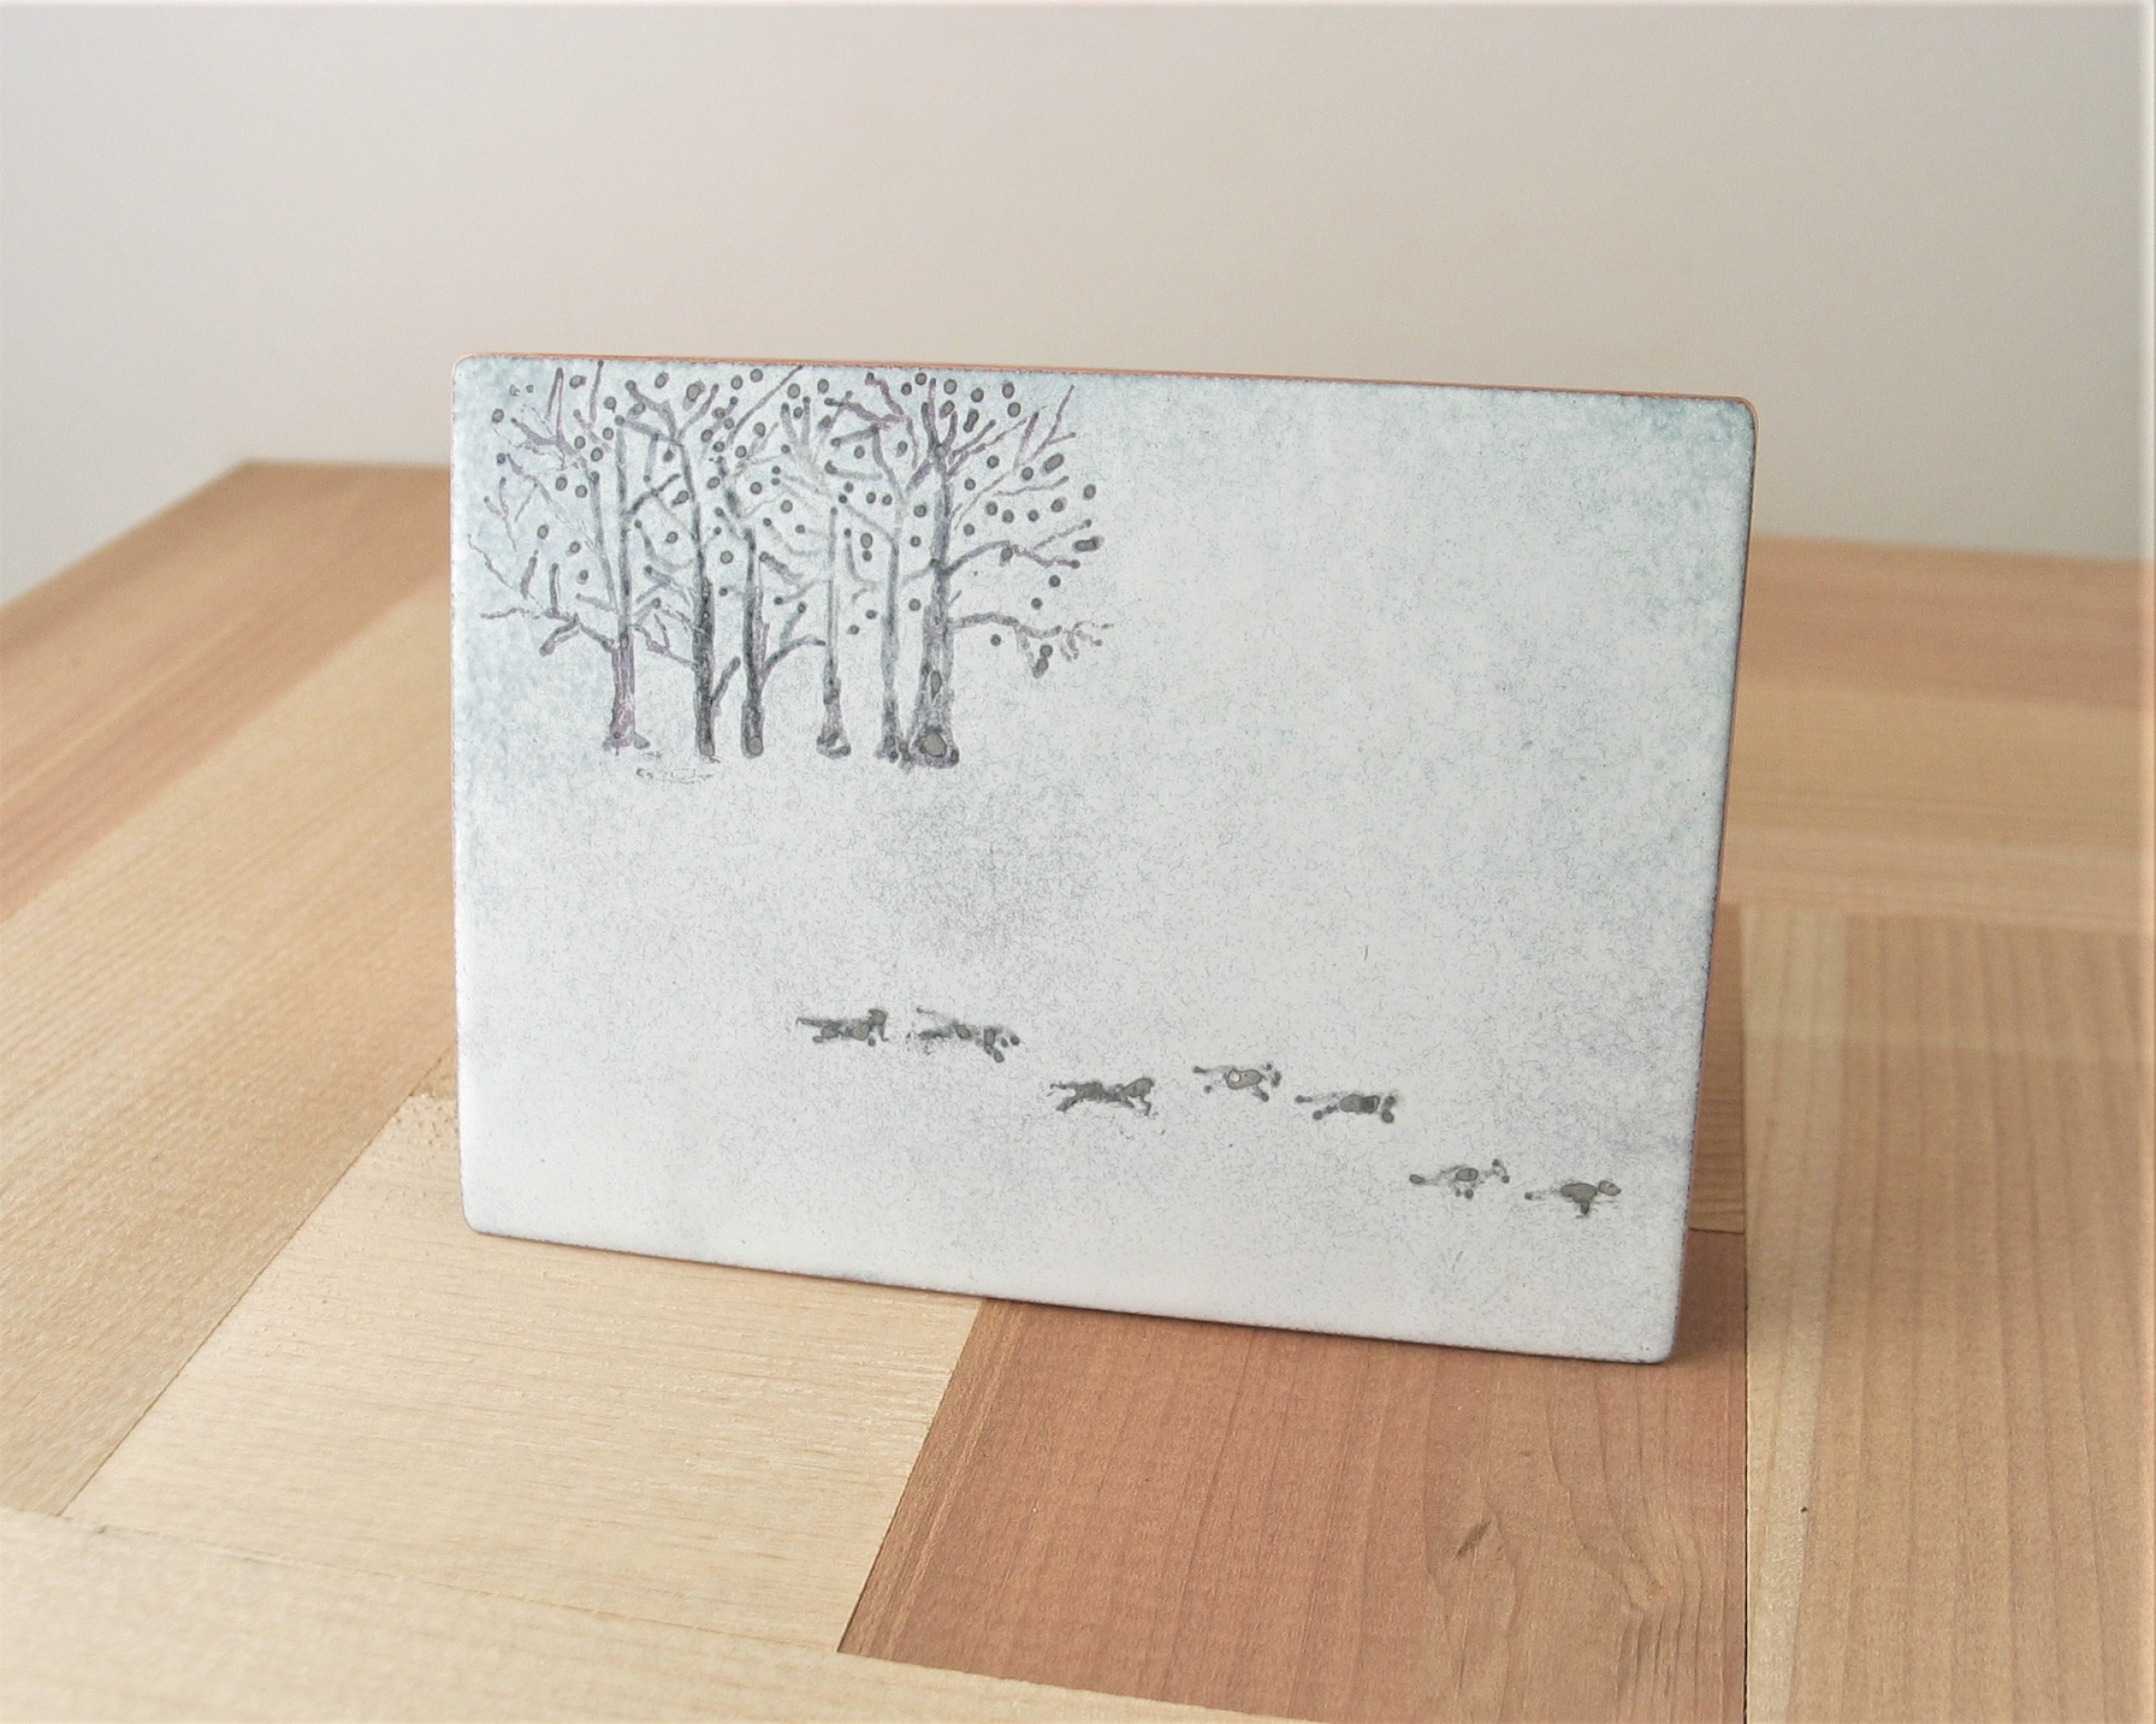 solid copper trinket box 3" x 2" with enameled lid with silhouettes of trees and running wolves